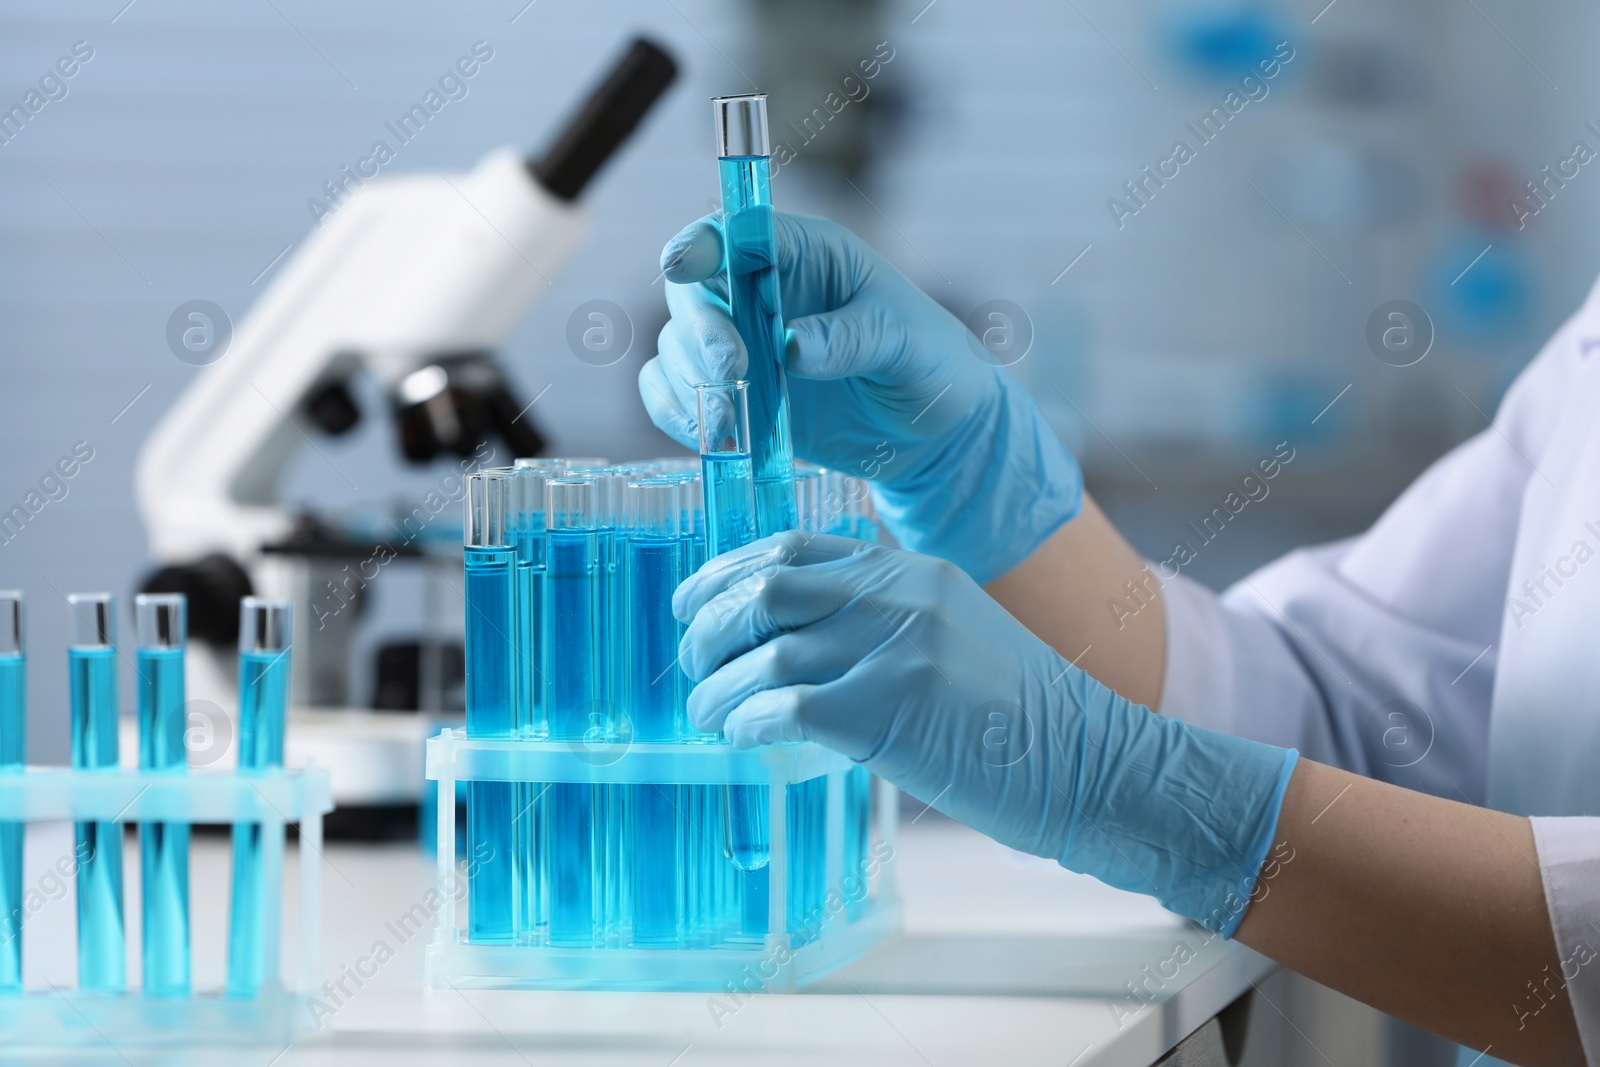 Photo of Scientist taking test tubes with samples from rack in laboratory, closeup